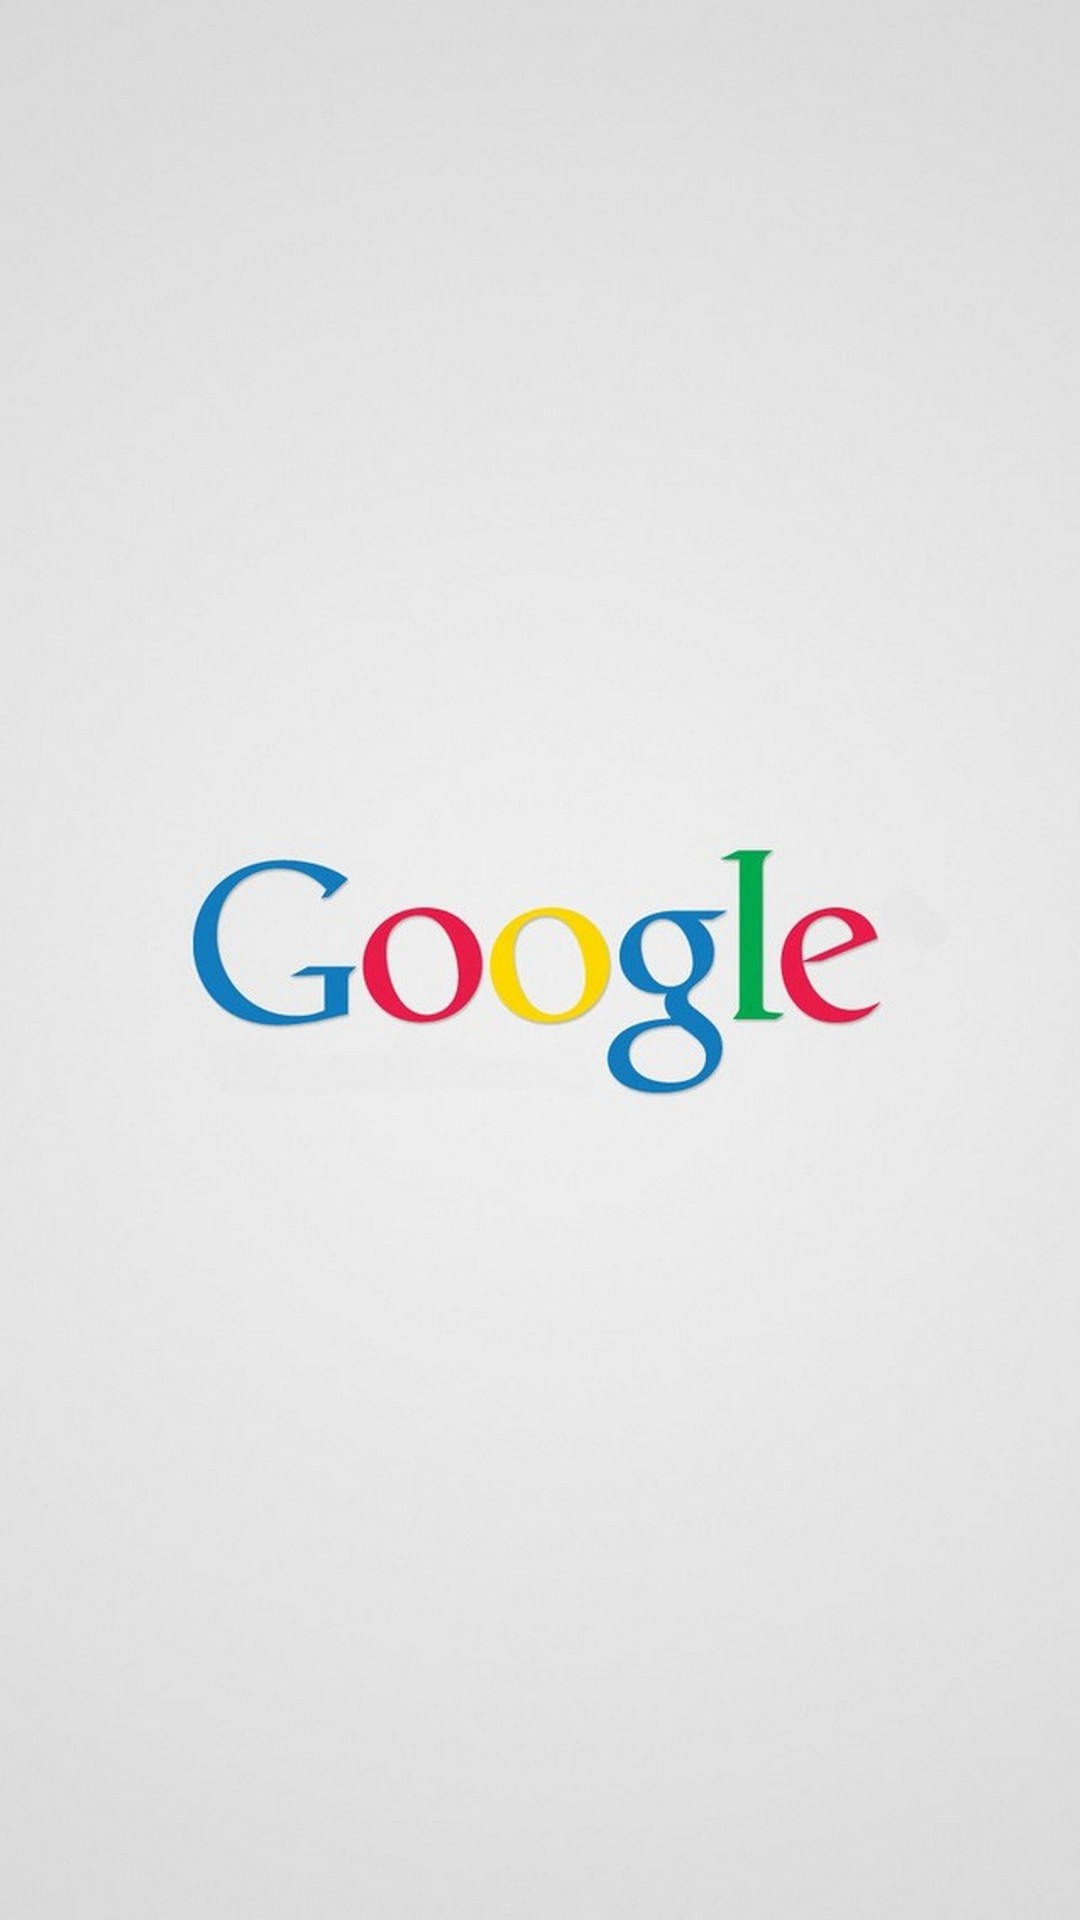 Google Wallpaper Android with HD resolution 1080x1920